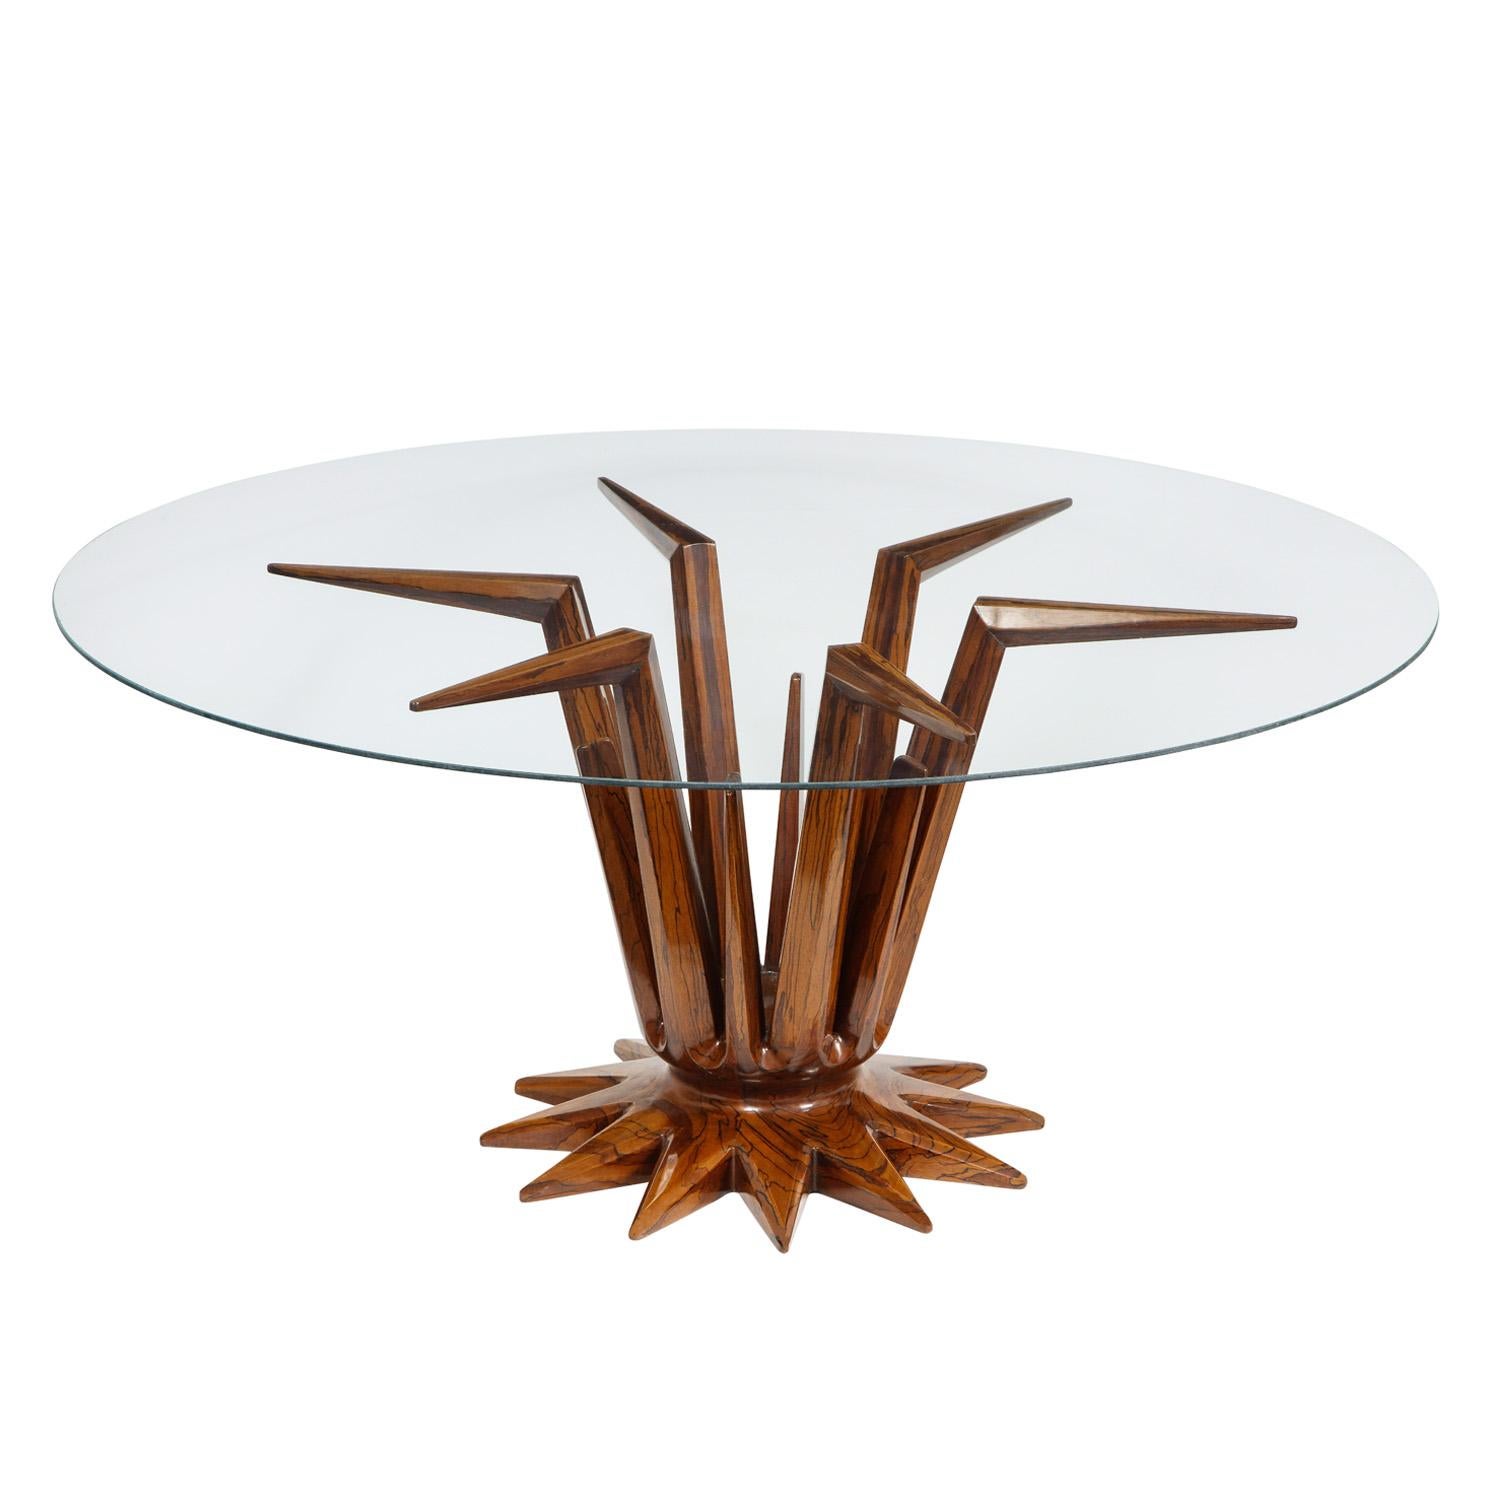 Artisan sculptural coffee table, crown of thorns style design in lacquered rosewood with glass top, Italian, 1950's. This coffee table is meticulously made.